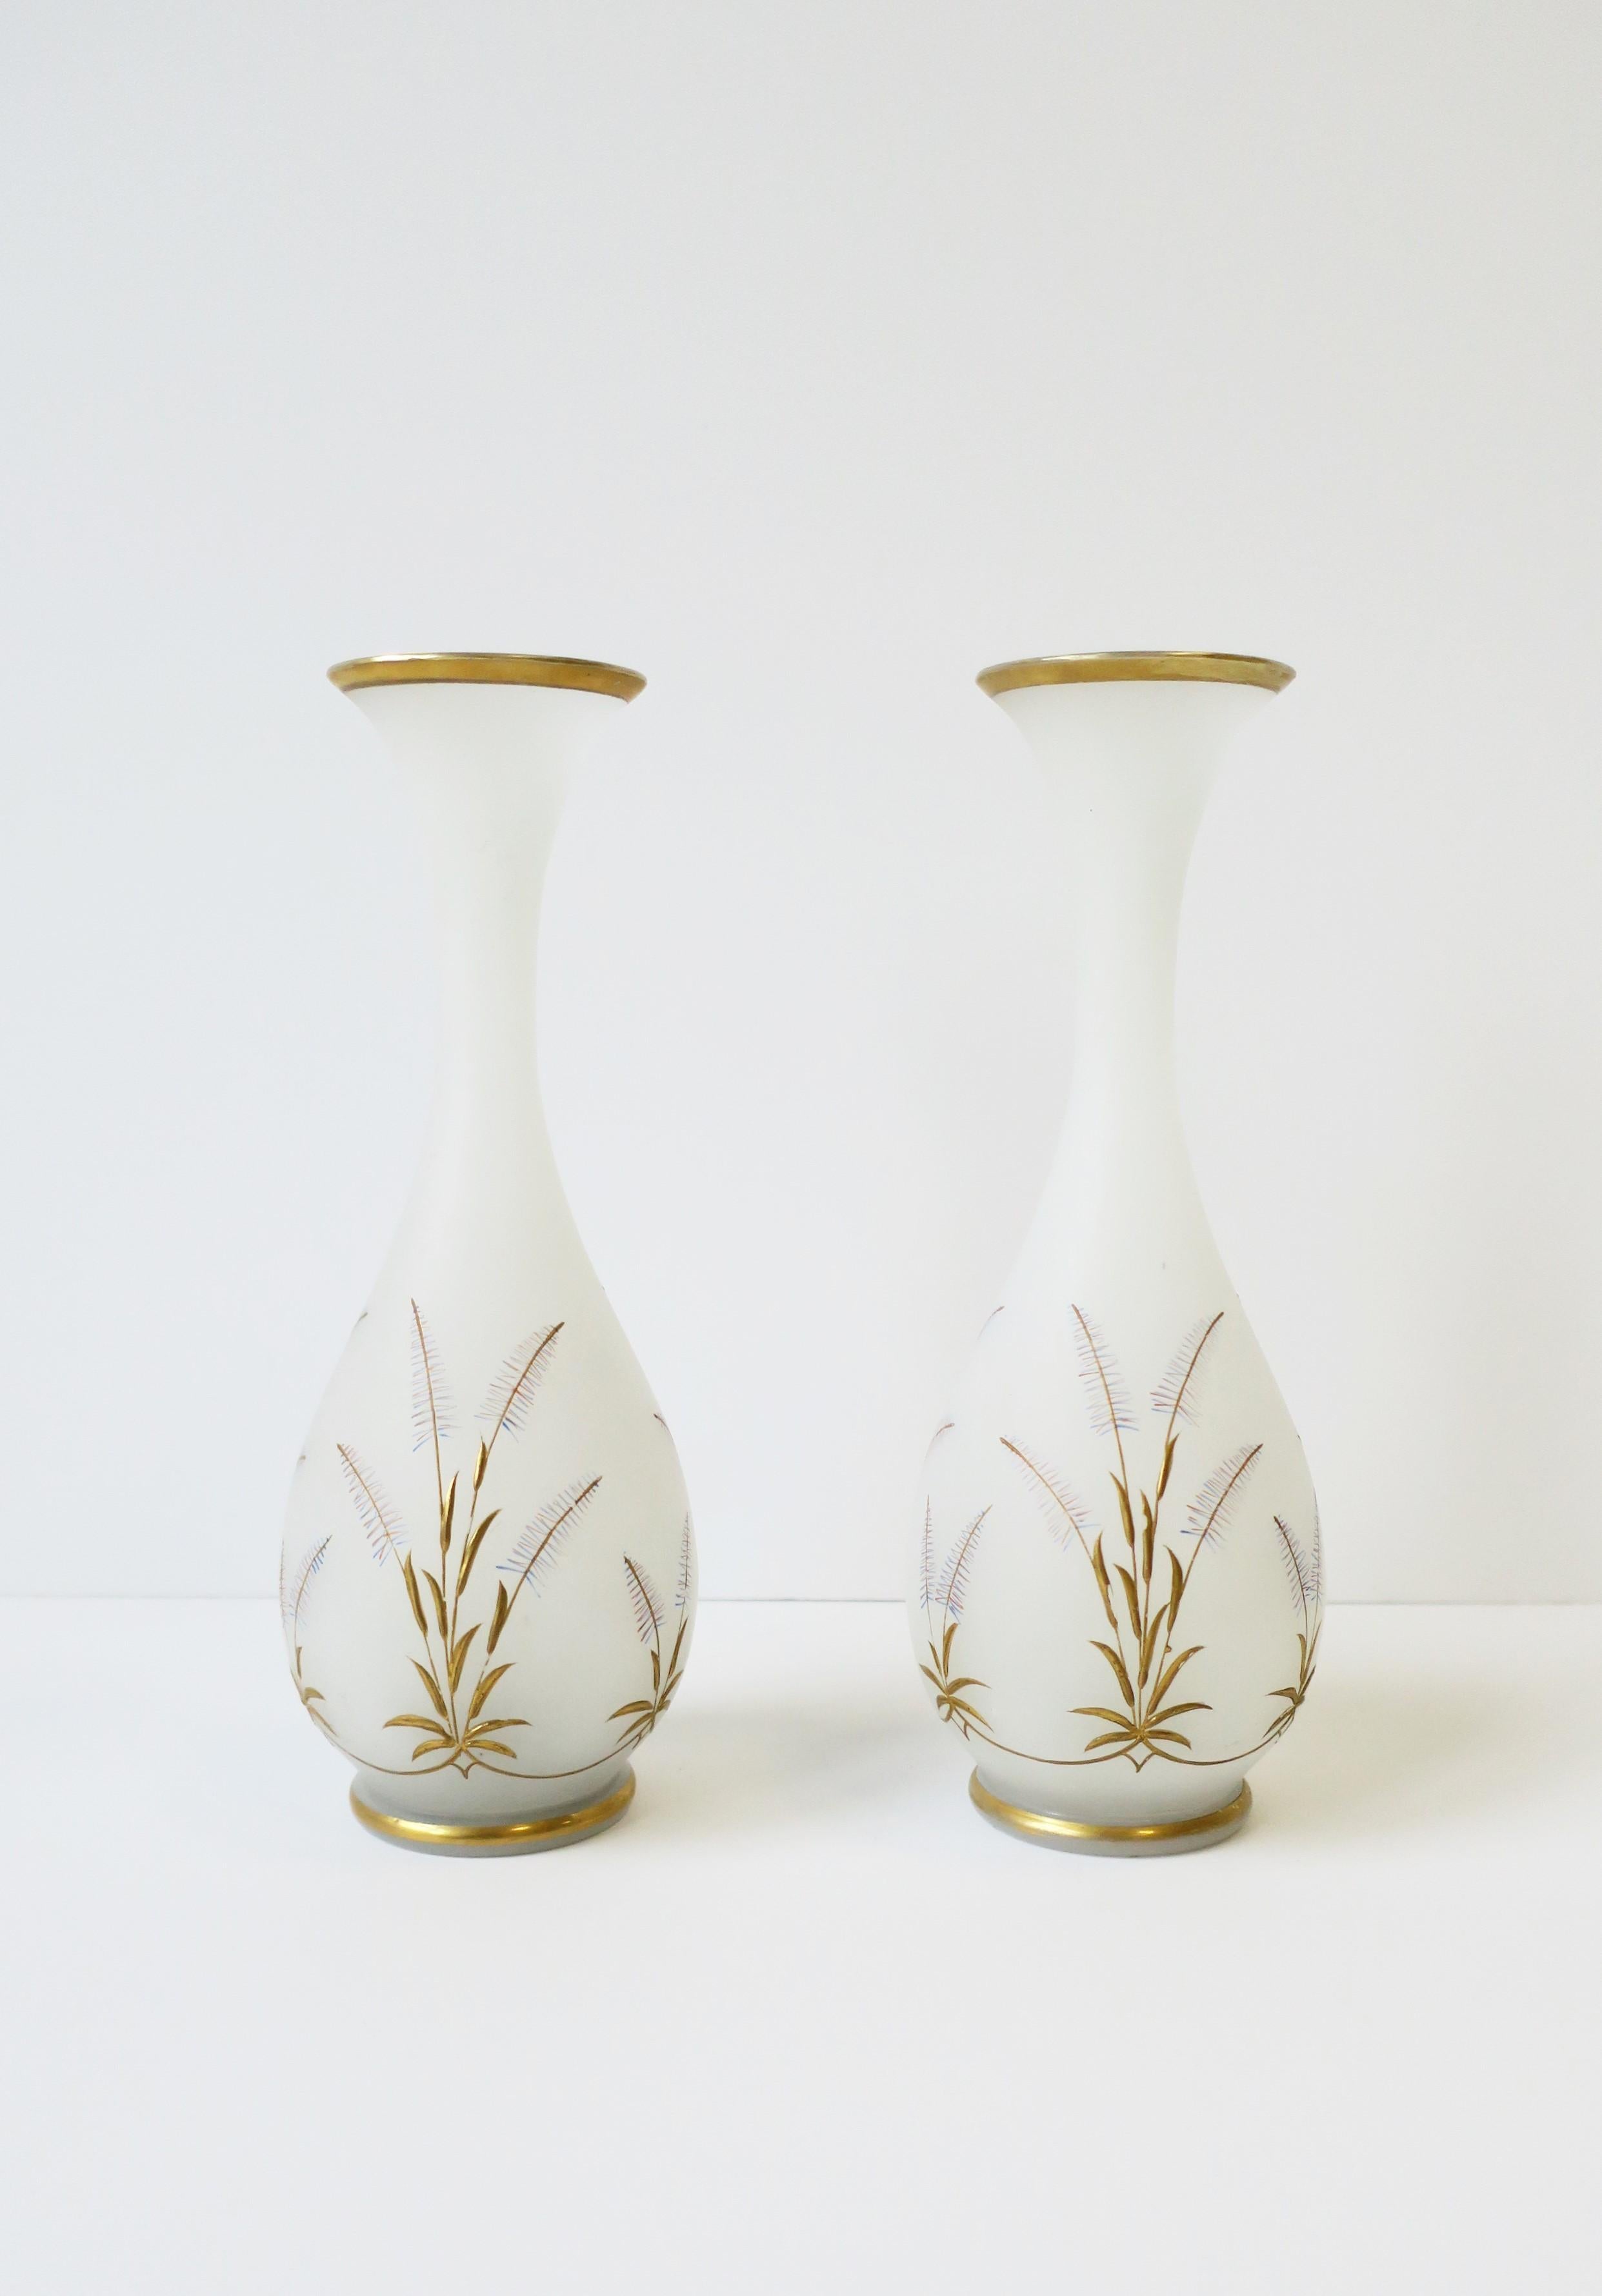 Opaline Glass Italian White Opaline and Gold Art Glass Vases with Sheef-of-Wheat Design, Pair